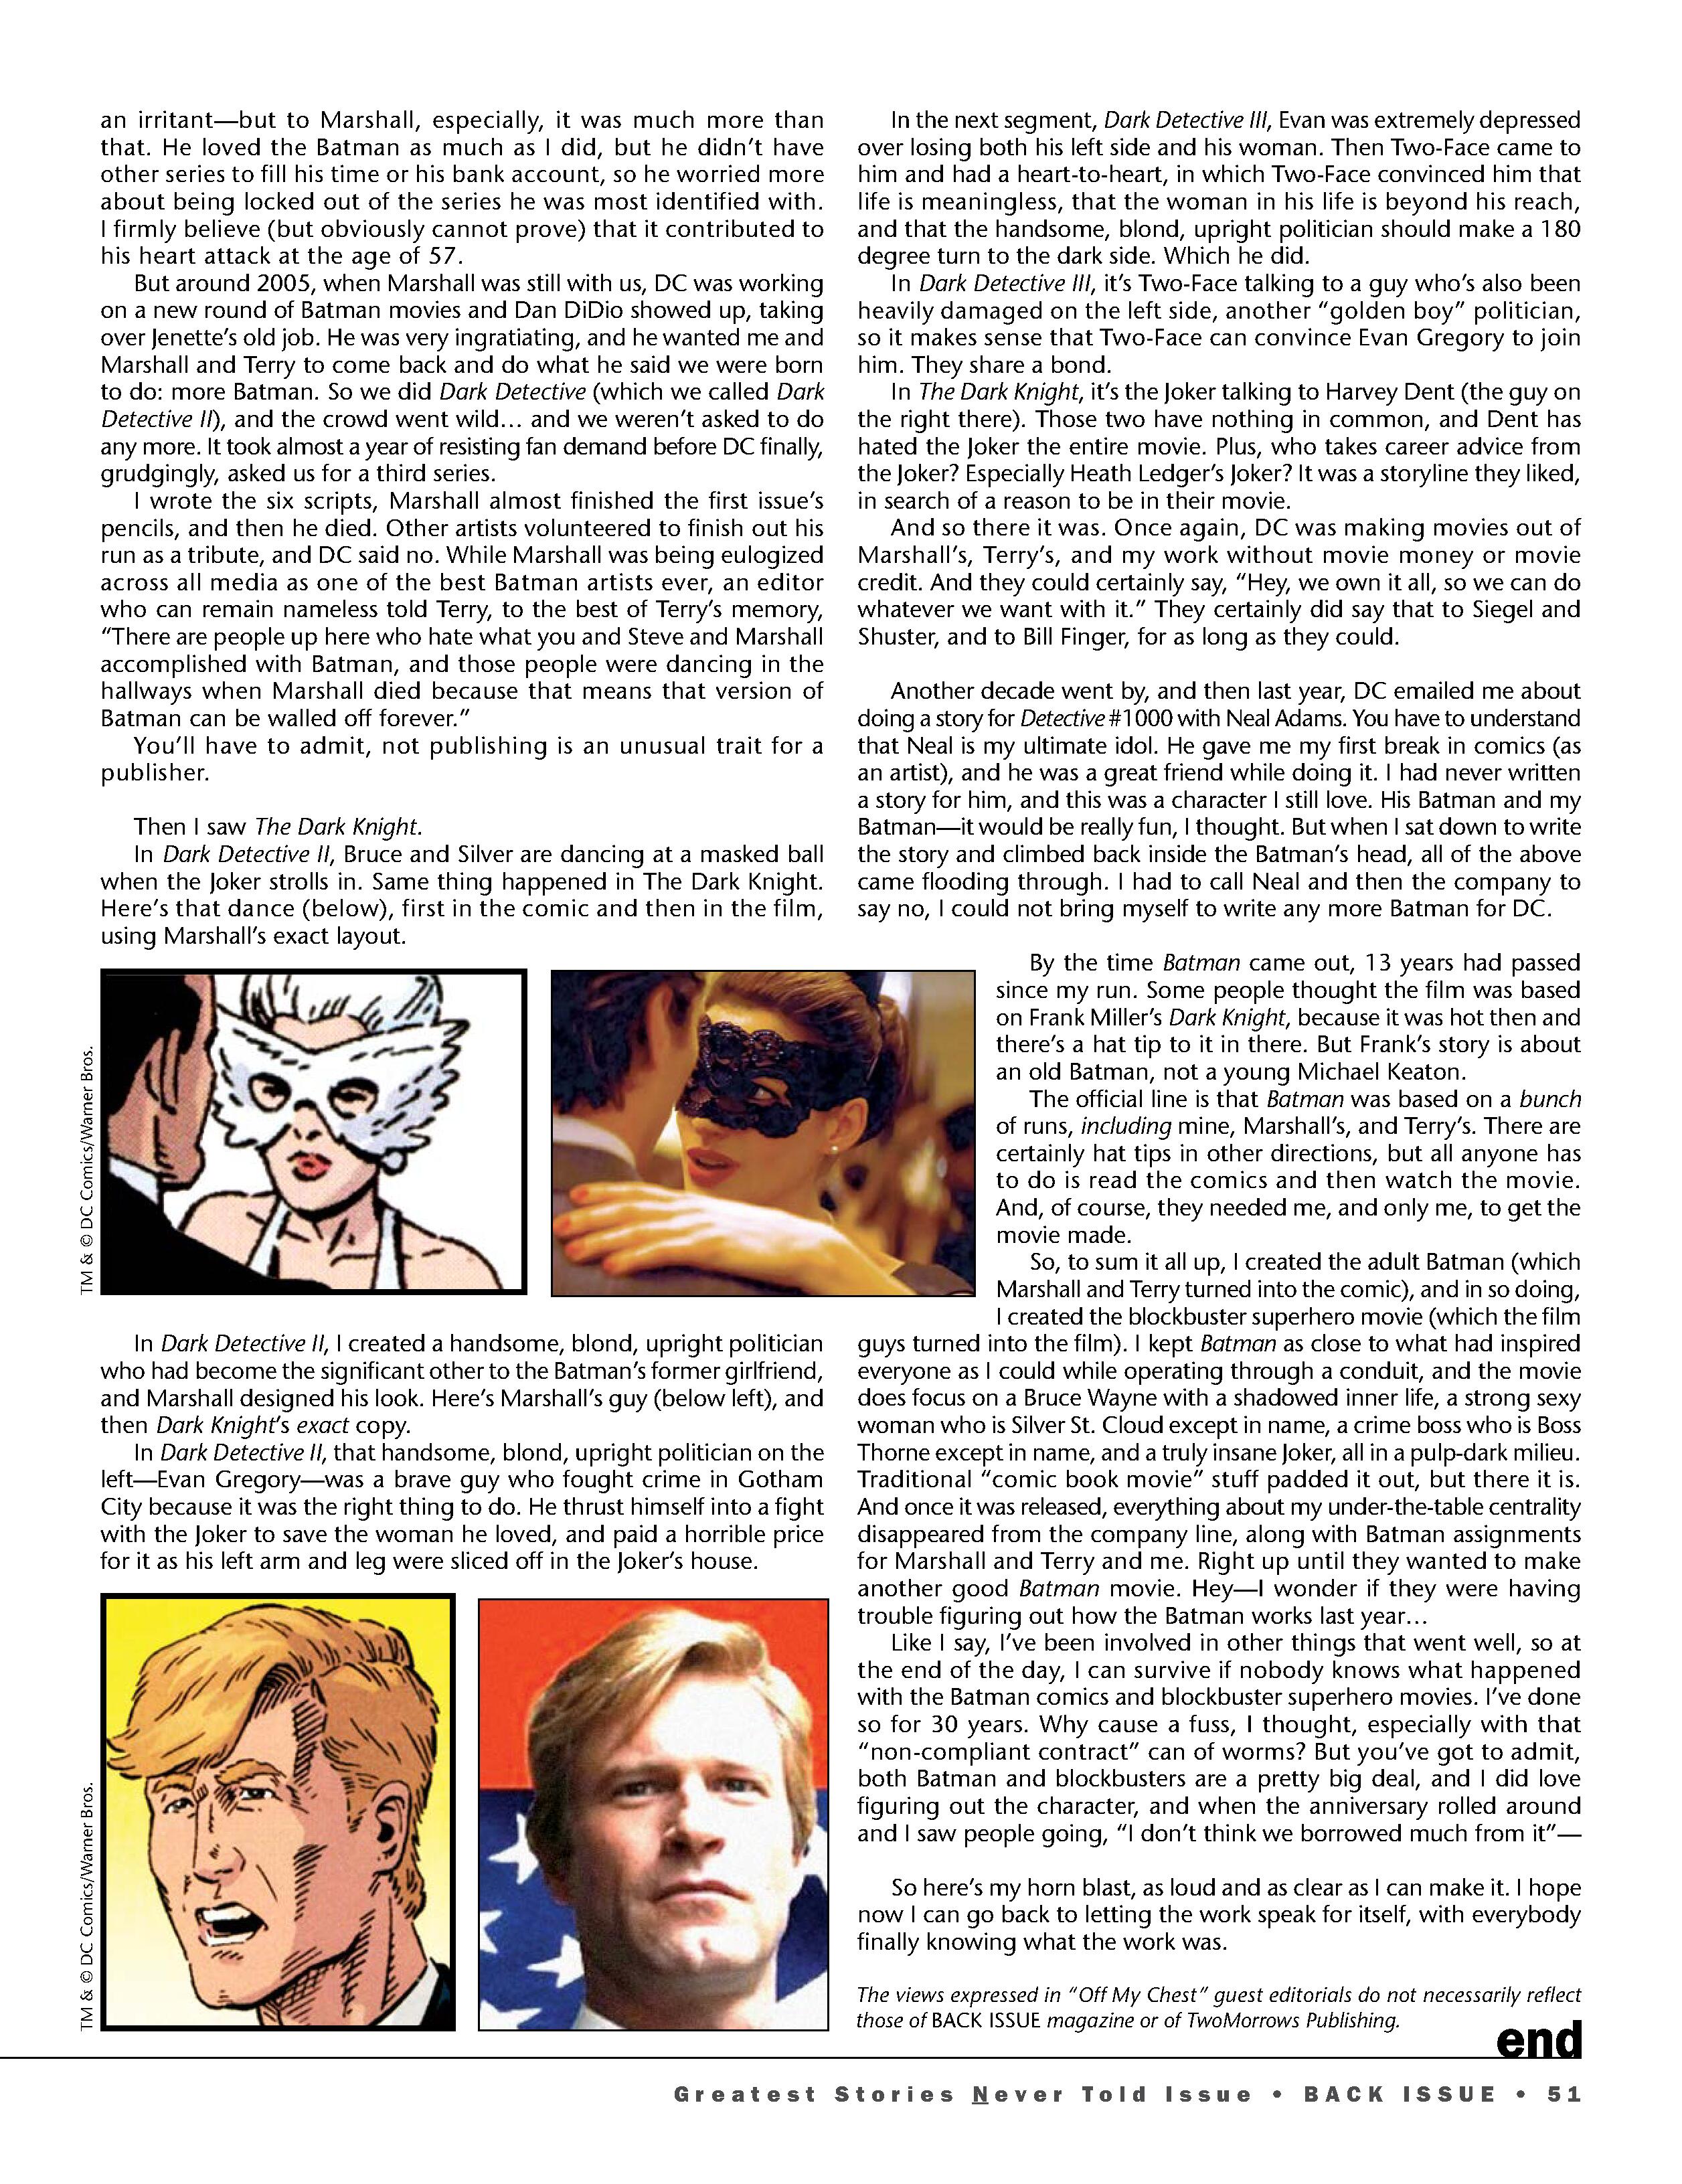 Read online Back Issue comic -  Issue #118 - 53